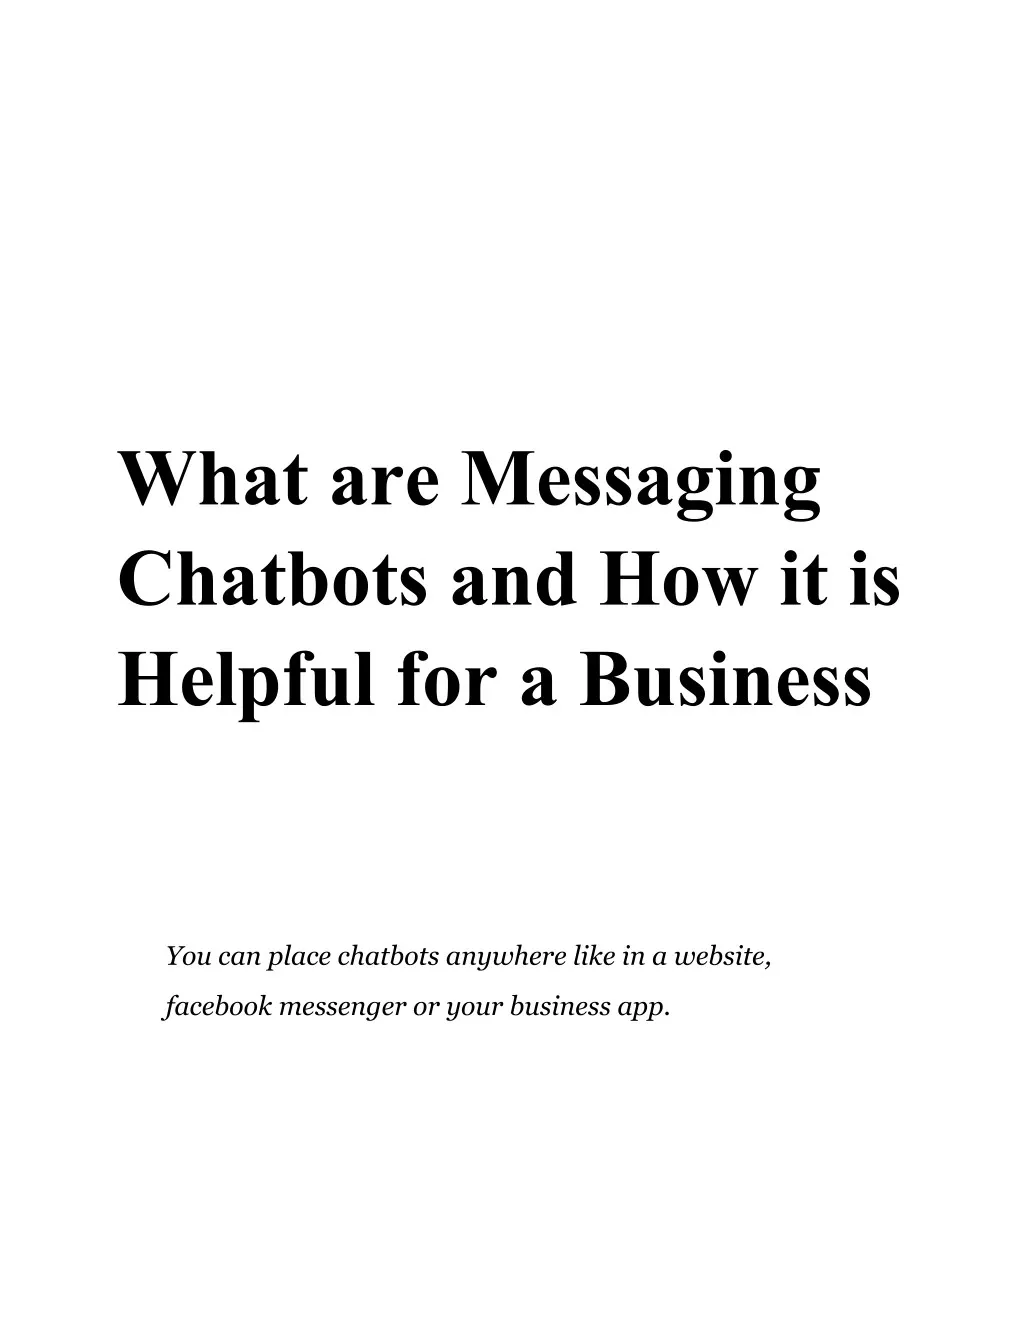 what are messaging chatbots and how it is helpful